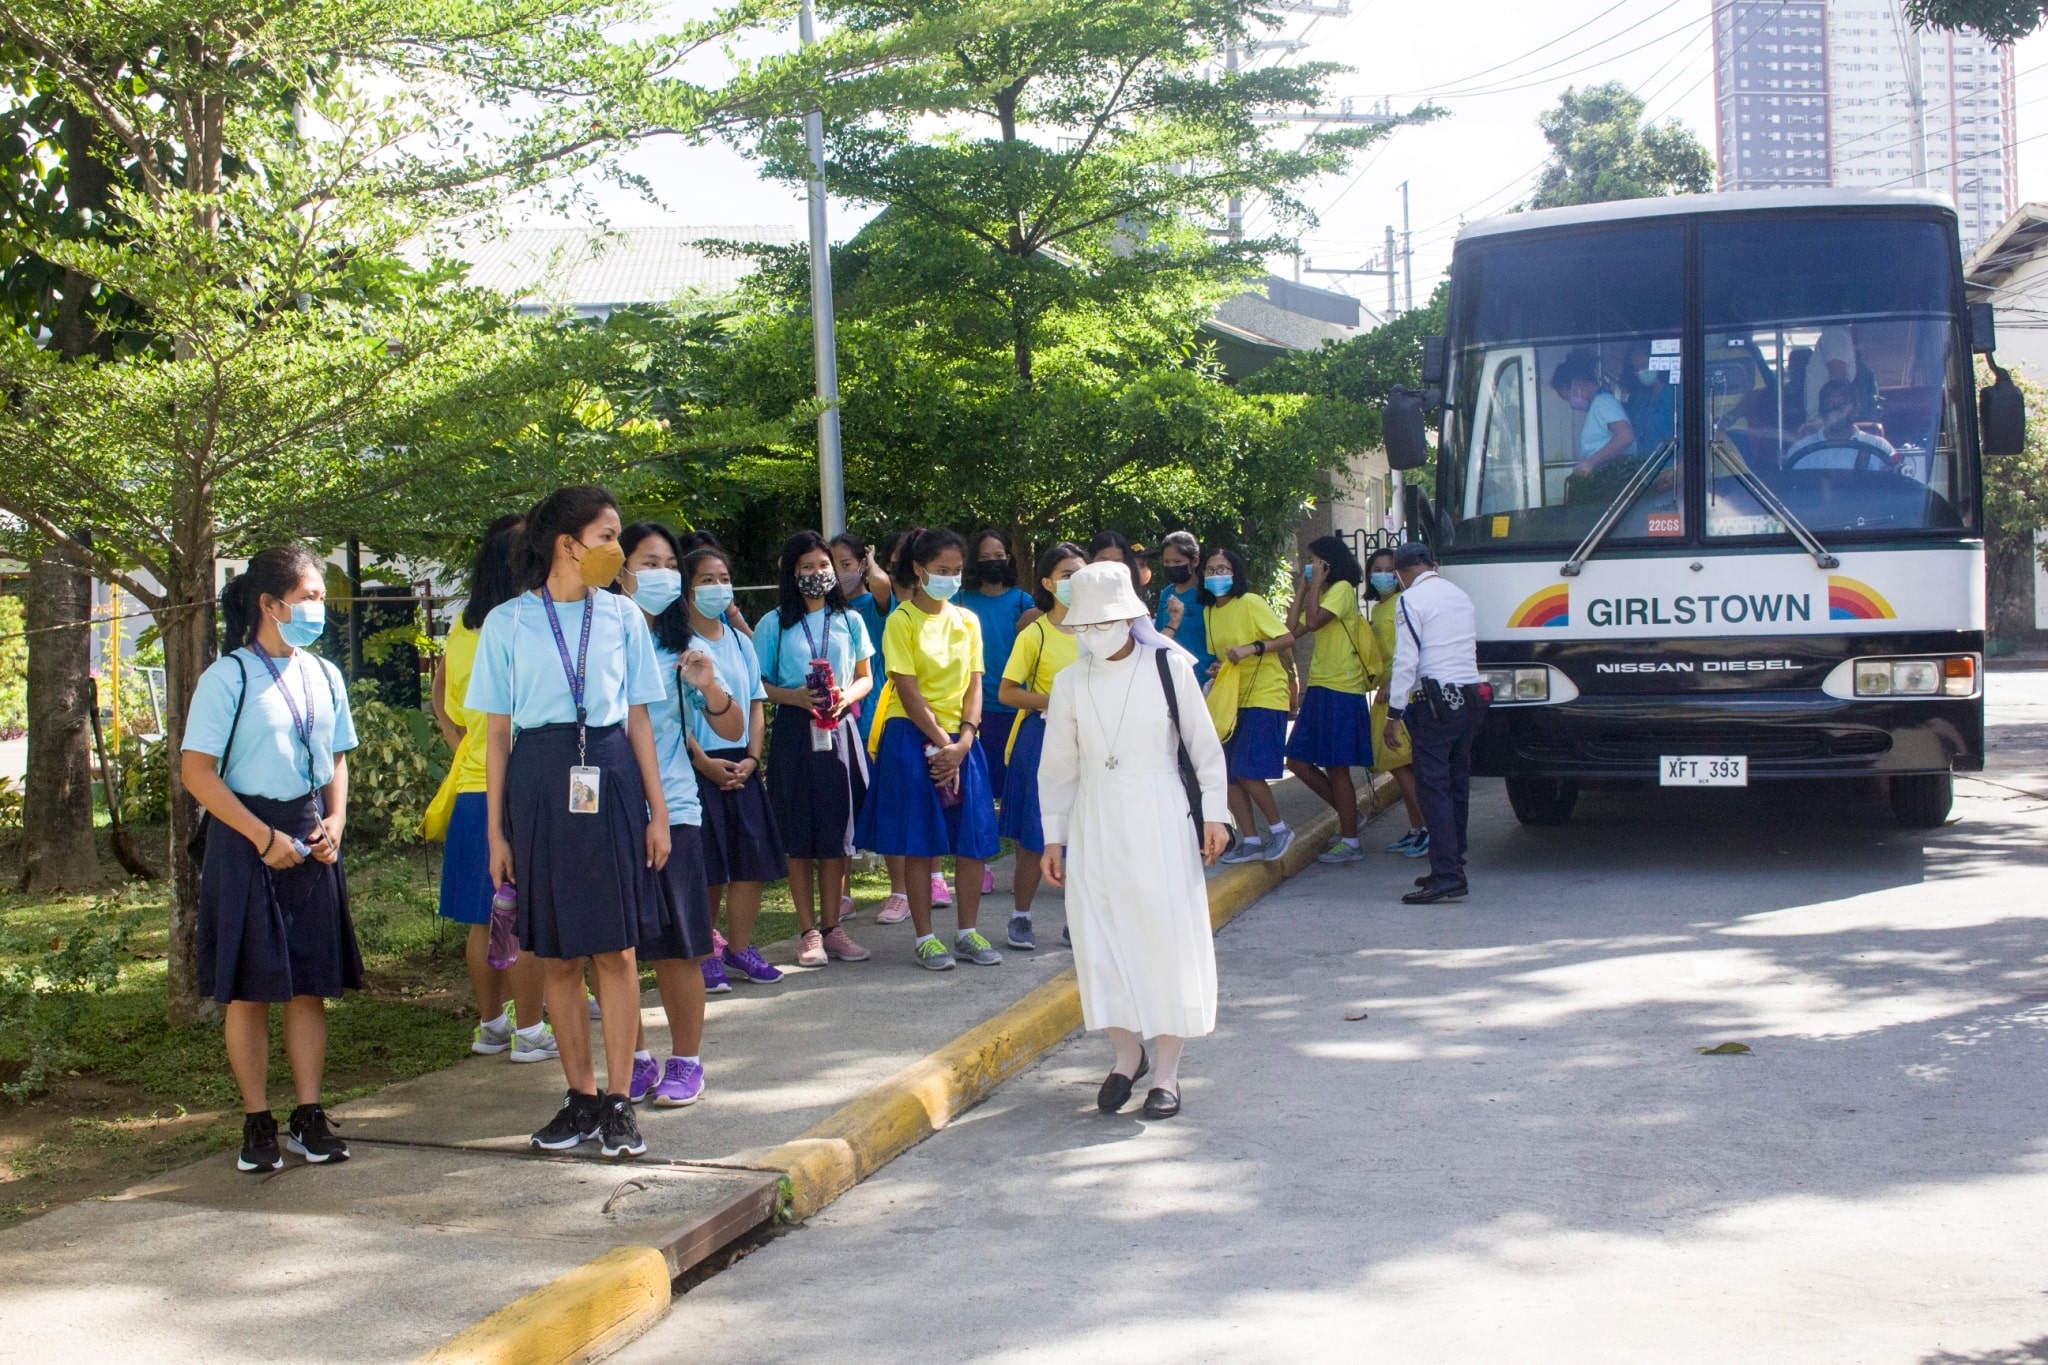 100 students from Sisters of Mary Schools – Biga Girlstown in Silang, Cavite arrive at the Buddhist Tzu Chi Campus for their eye checkup and refraction test.【Photo by Matt Serrano】